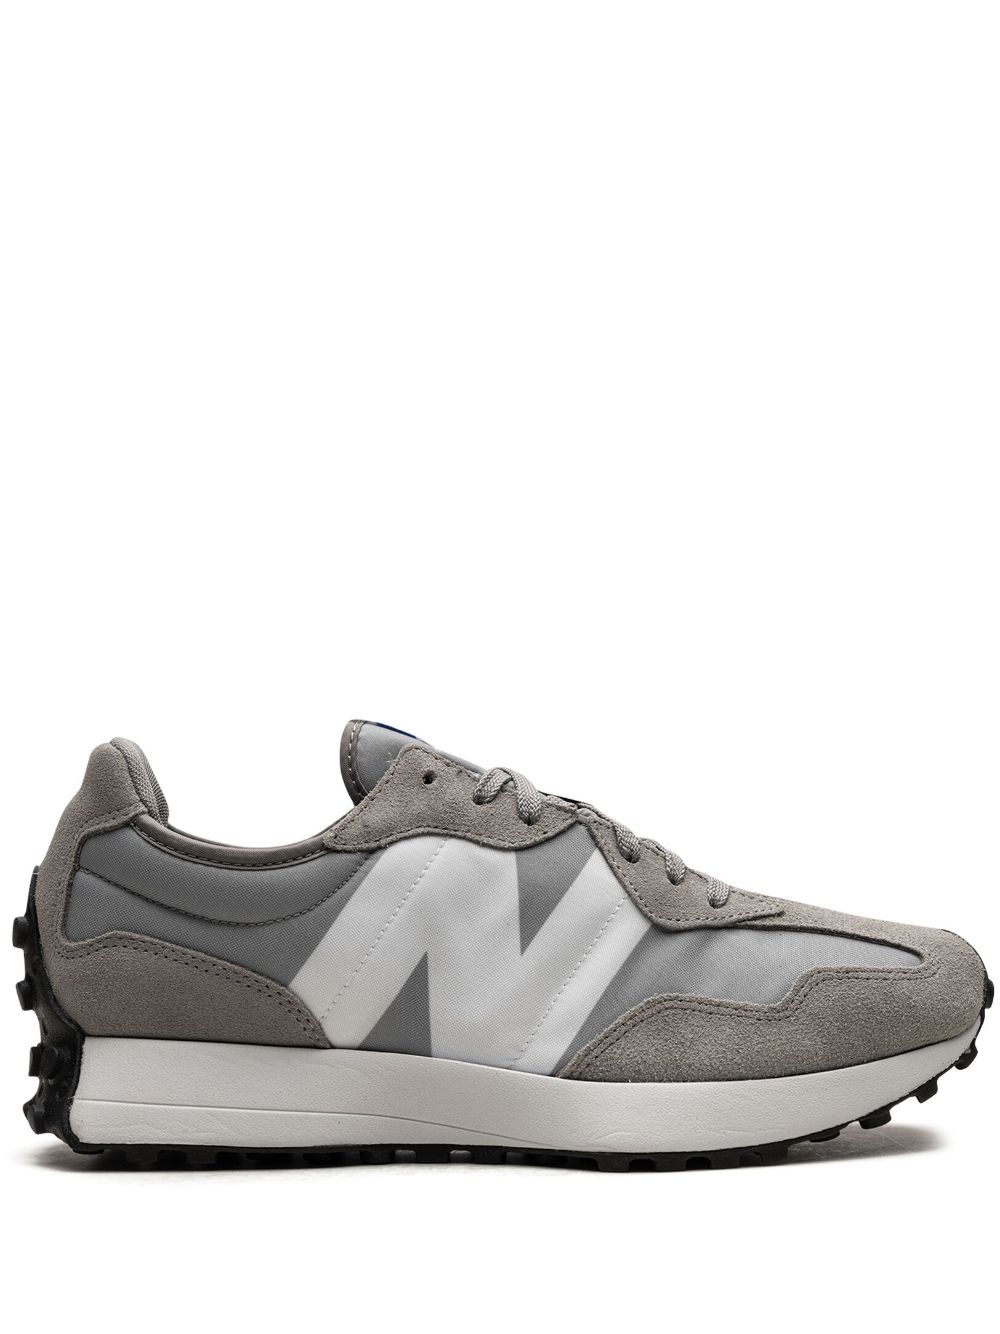 New Balance 327 "Marblehead White" sneakers - Grey